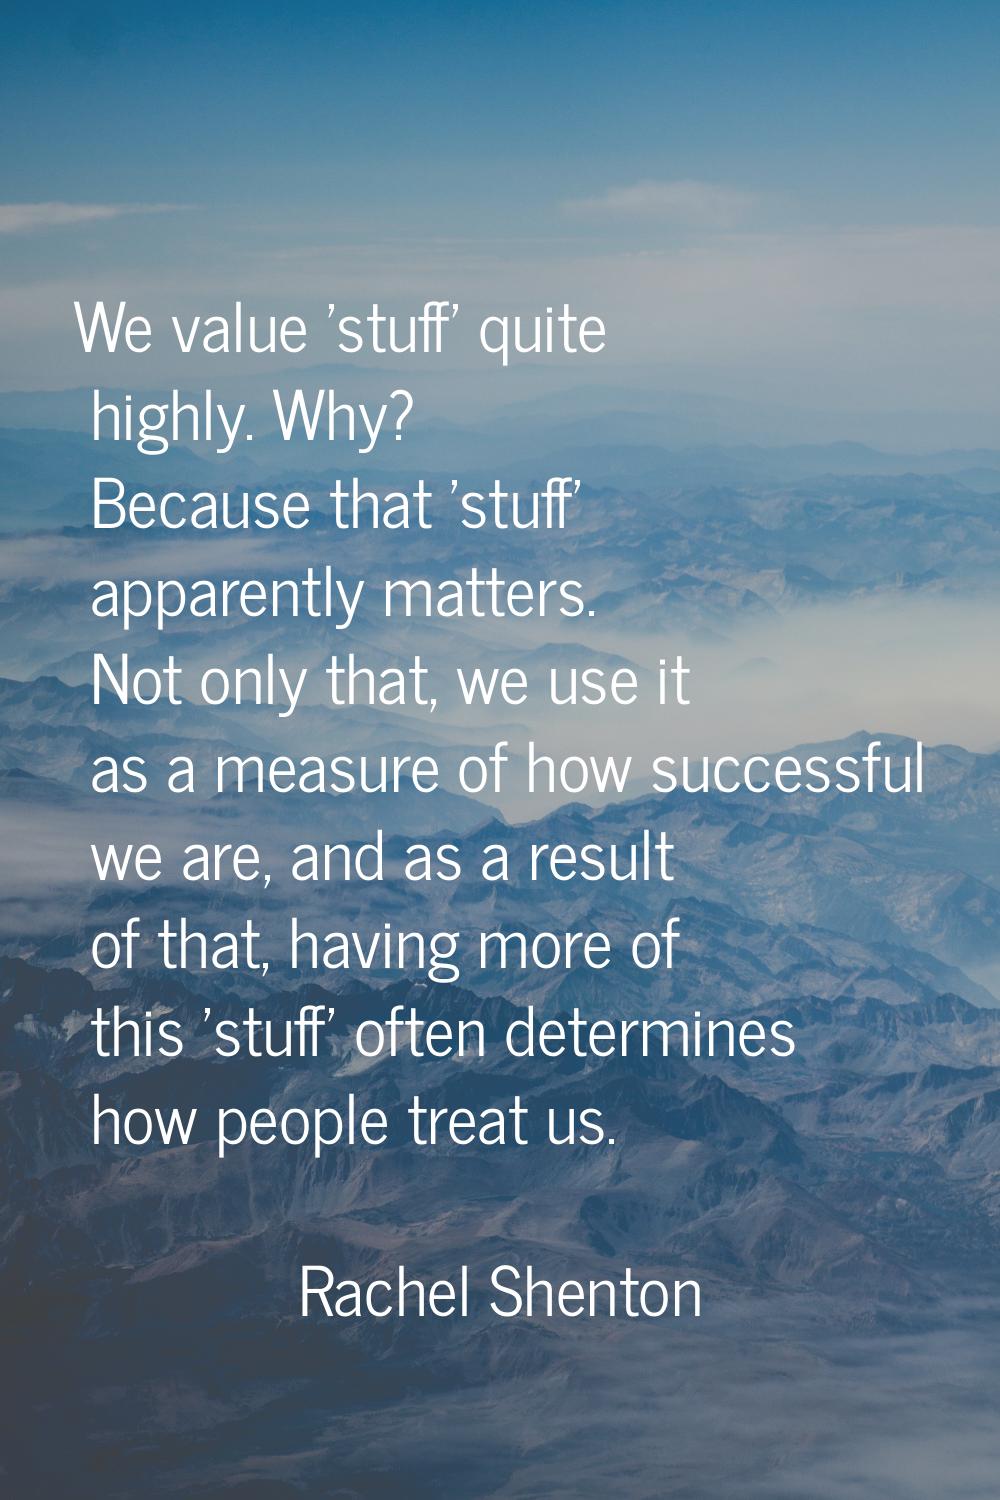 We value 'stuff' quite highly. Why? Because that 'stuff' apparently matters. Not only that, we use 